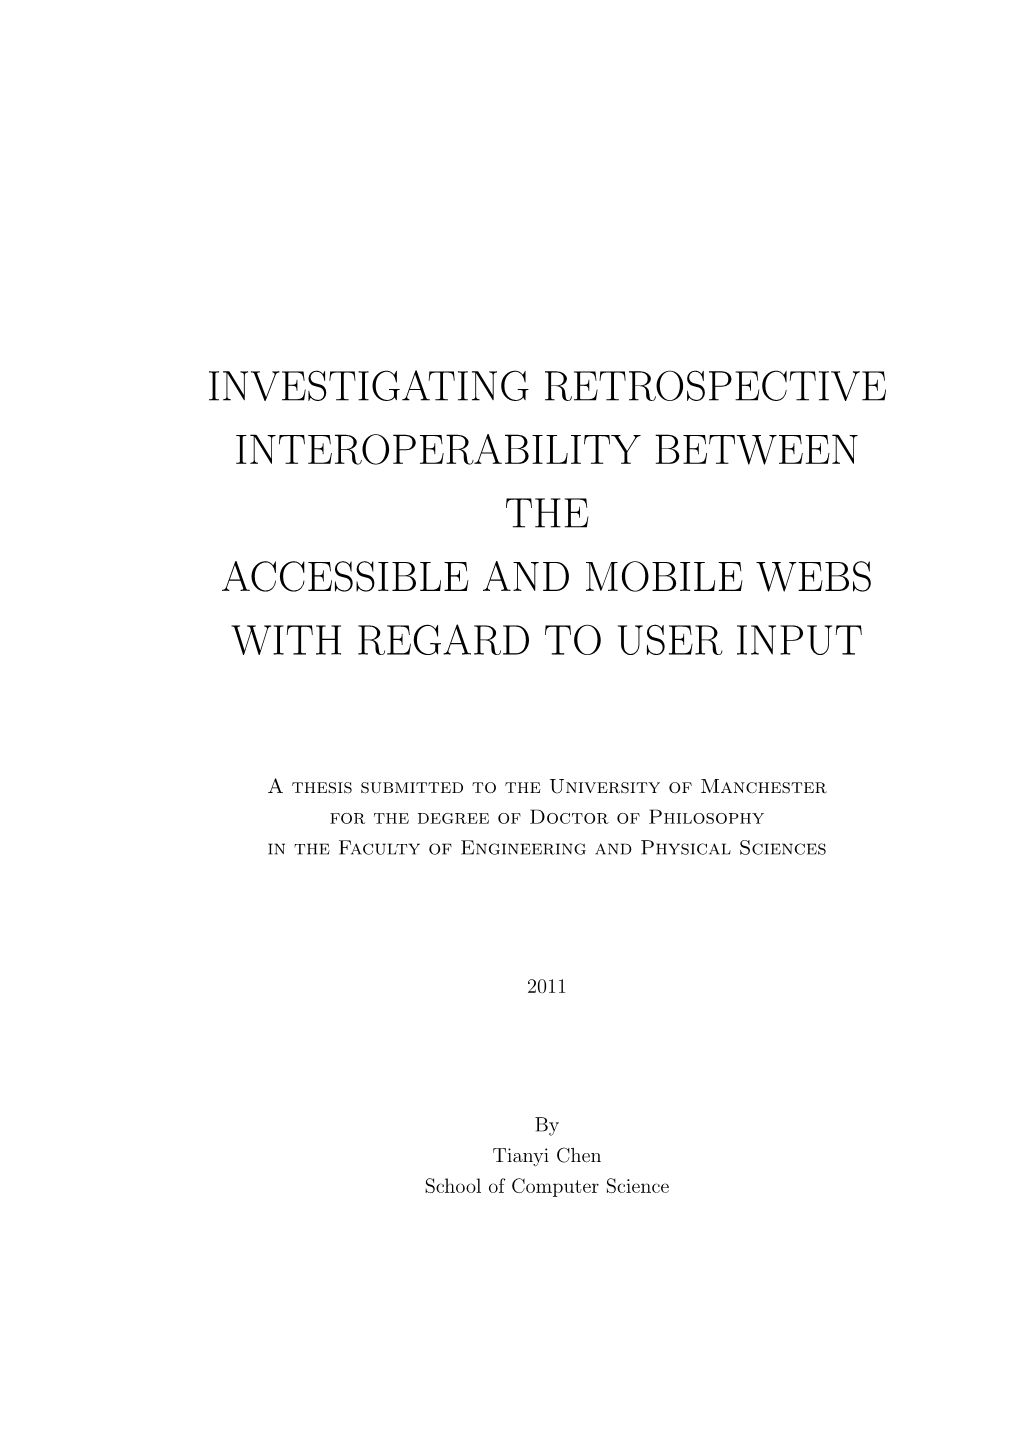 Investigating Retrospective Interoperability Between the Accessible and Mobile Webs with Regard to User Input